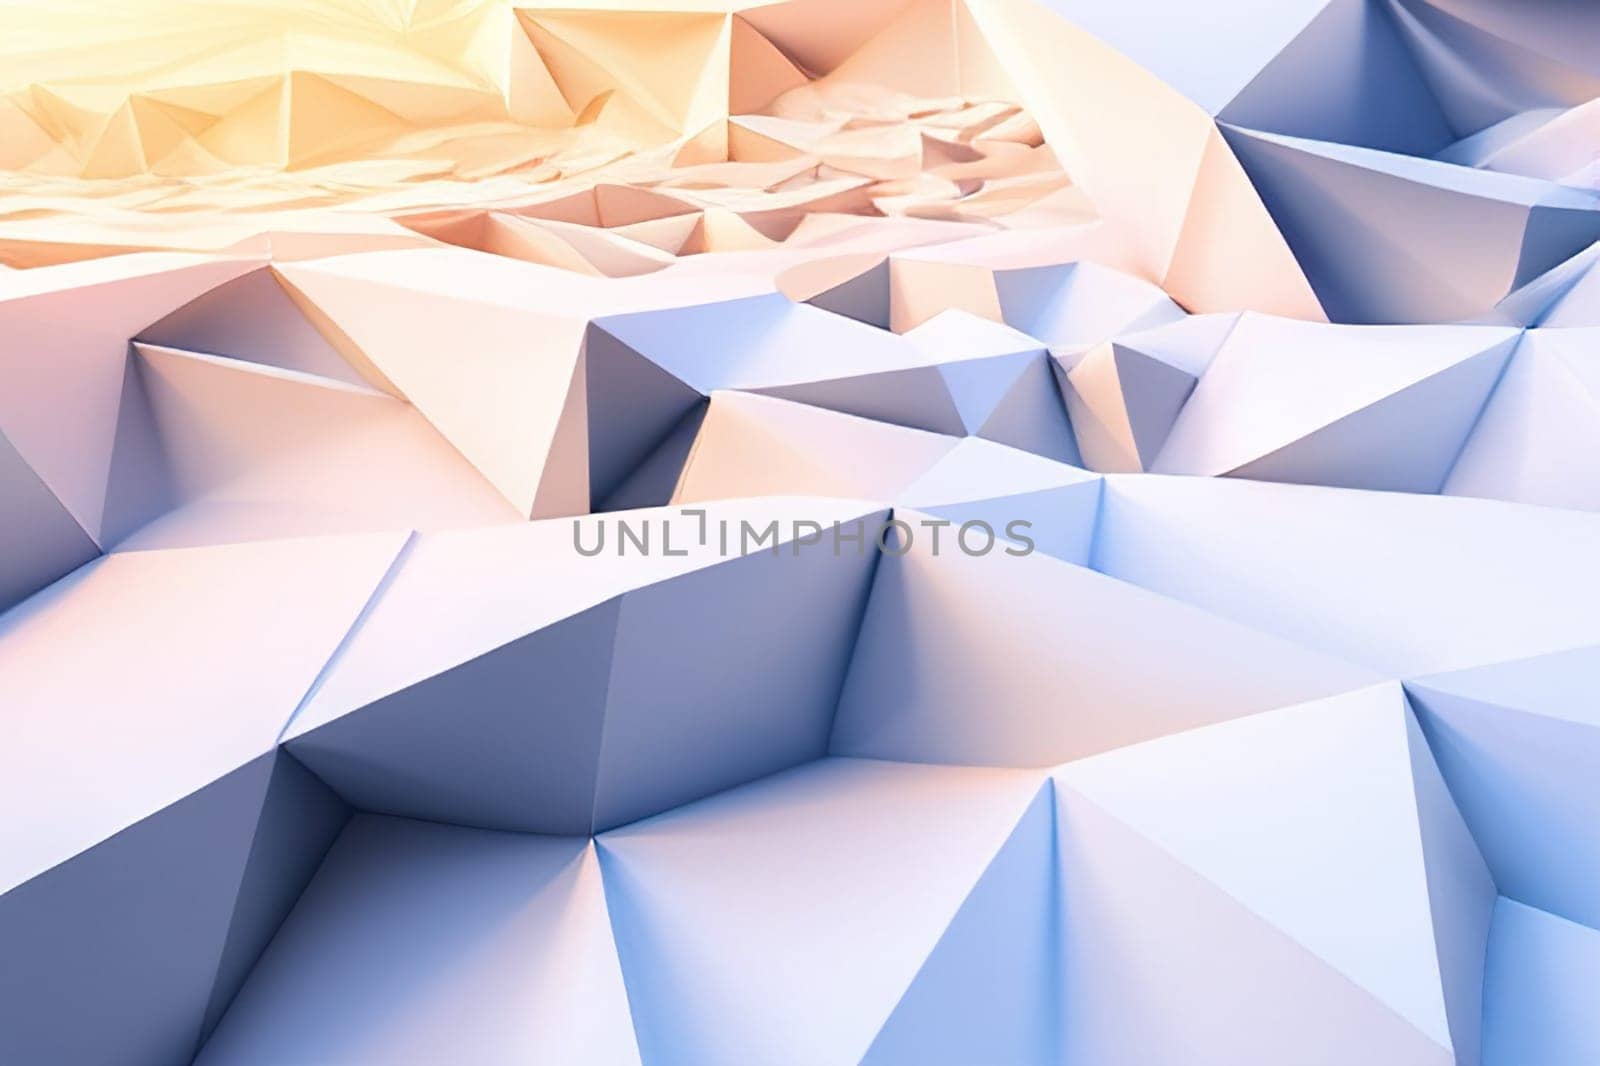 Abstract polygonal background of different color figures. Template for a text. by EkaterinaPereslavtseva